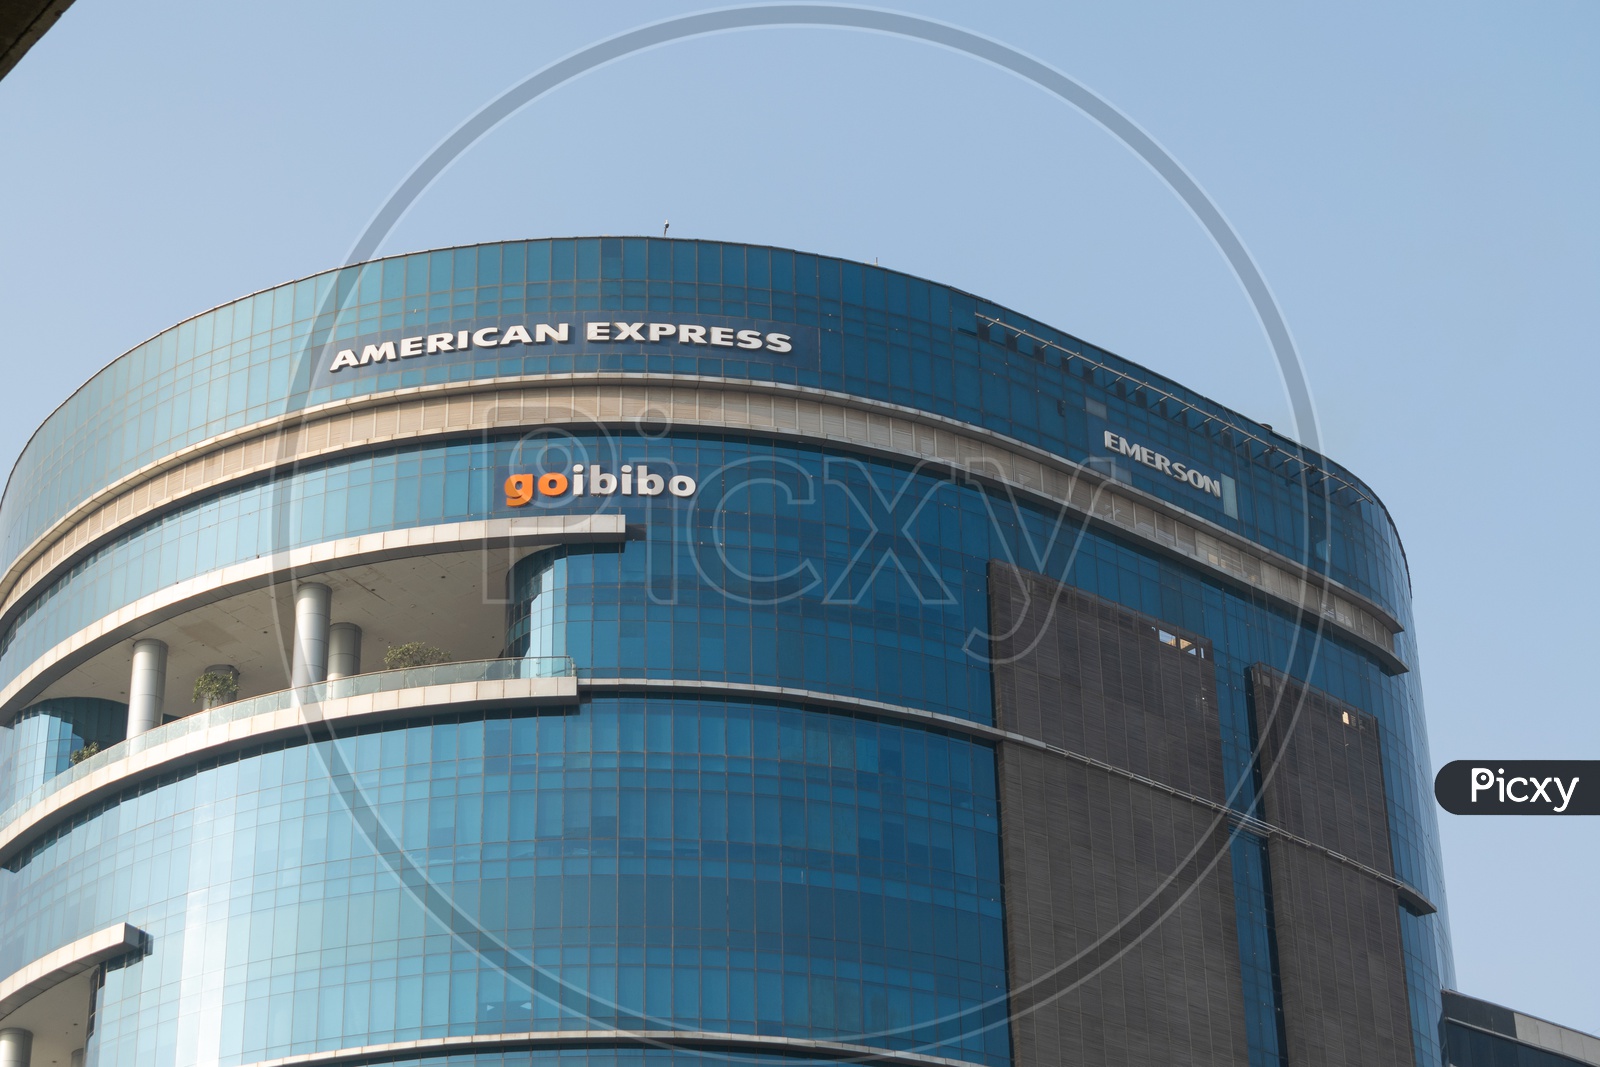 American express Goibibo Emerson Electric Office In A Building At DLF Cyber City